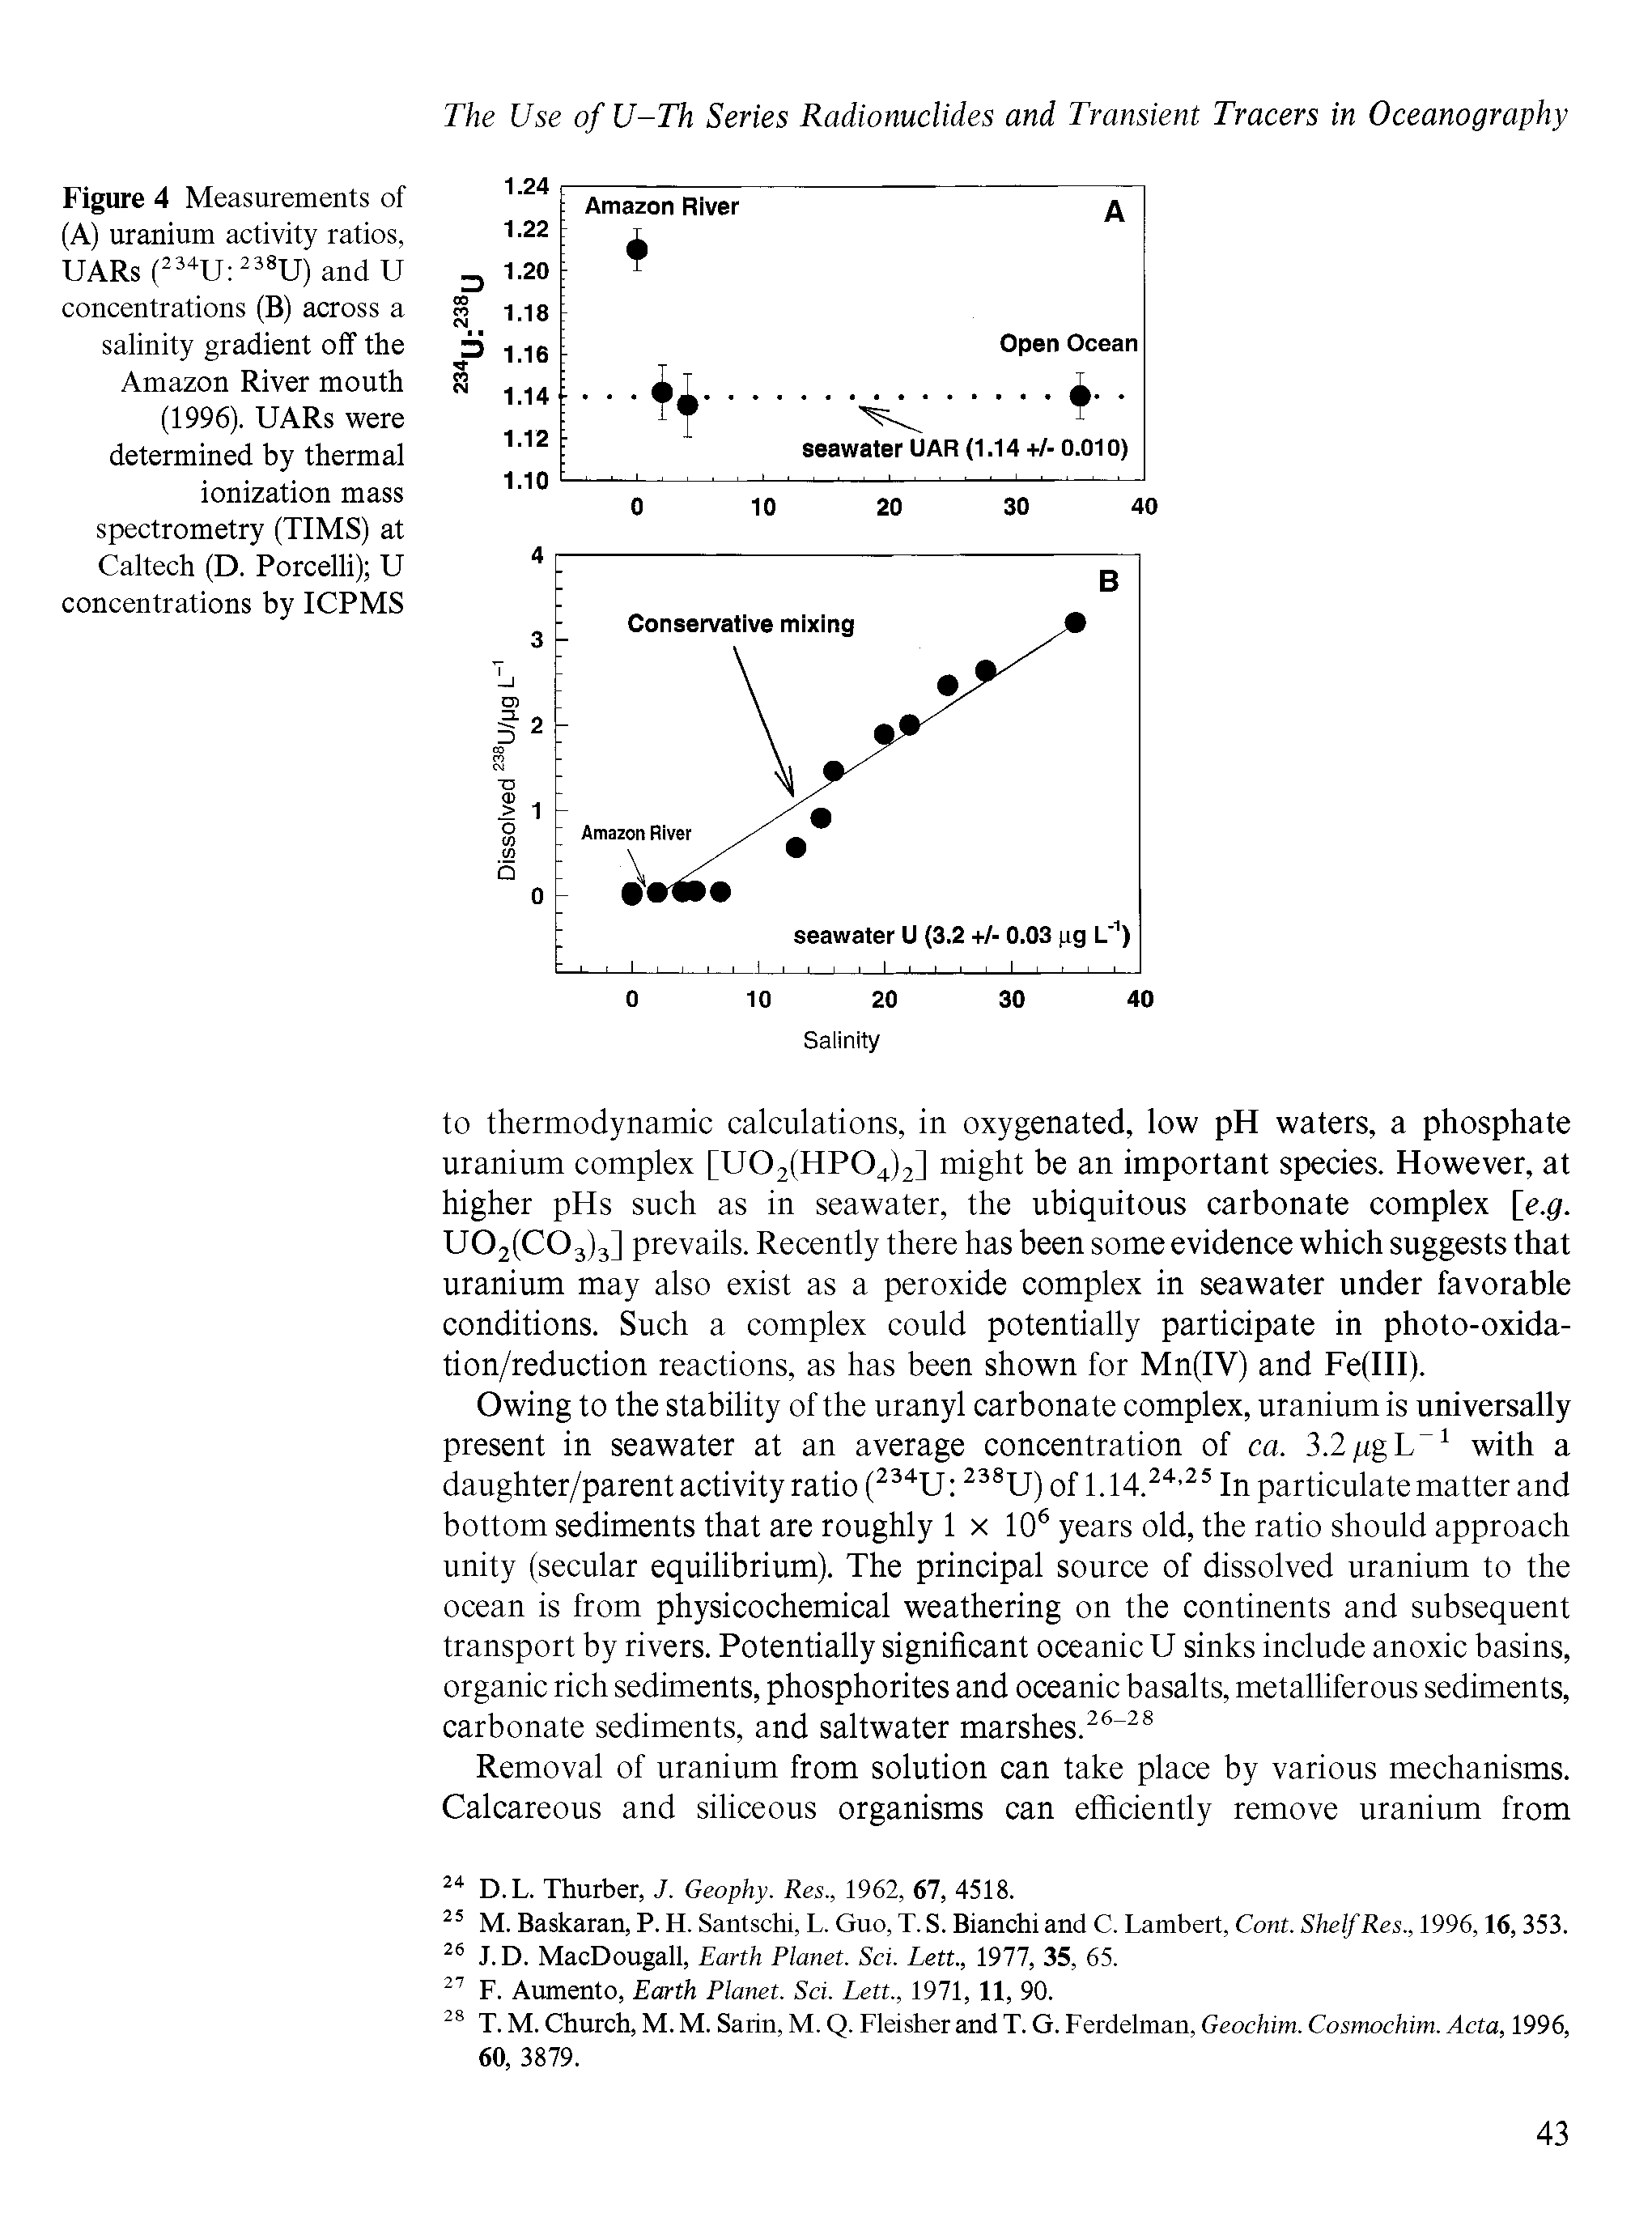 Figure 4 Measurements of (A) uranium activity ratios, UARs (234U 238U) and U concentrations (B) across a salinity gradient off the Amazon River mouth (1996). UARs were determined by thermal ionization mass spectrometry (TIMS) at Caltech (D. Porcelli) U concentrations by ICPMS...